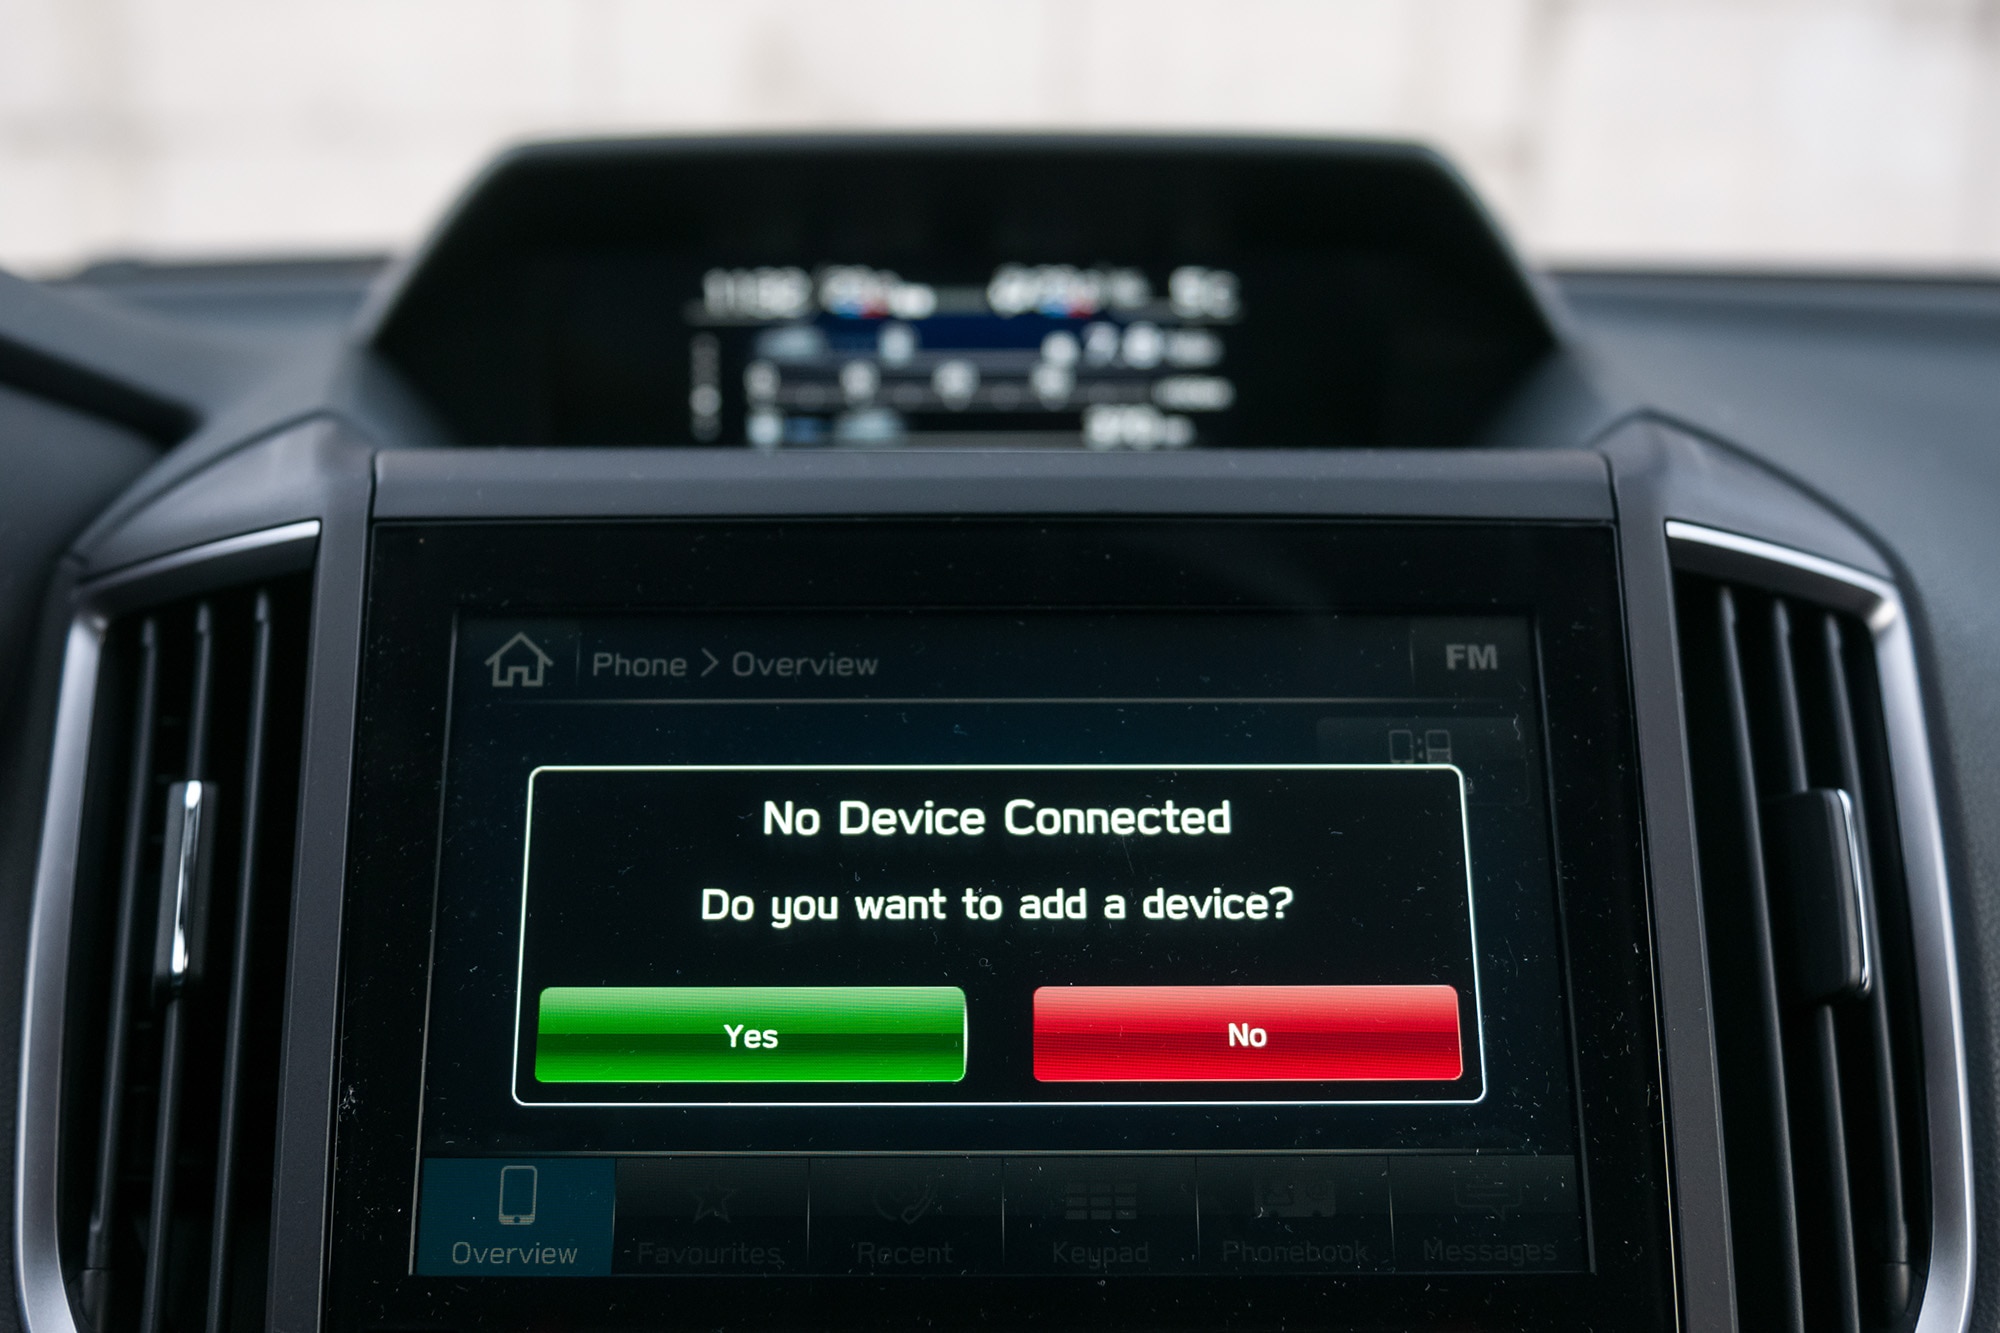 A car infotainment screen prompting to add a device.